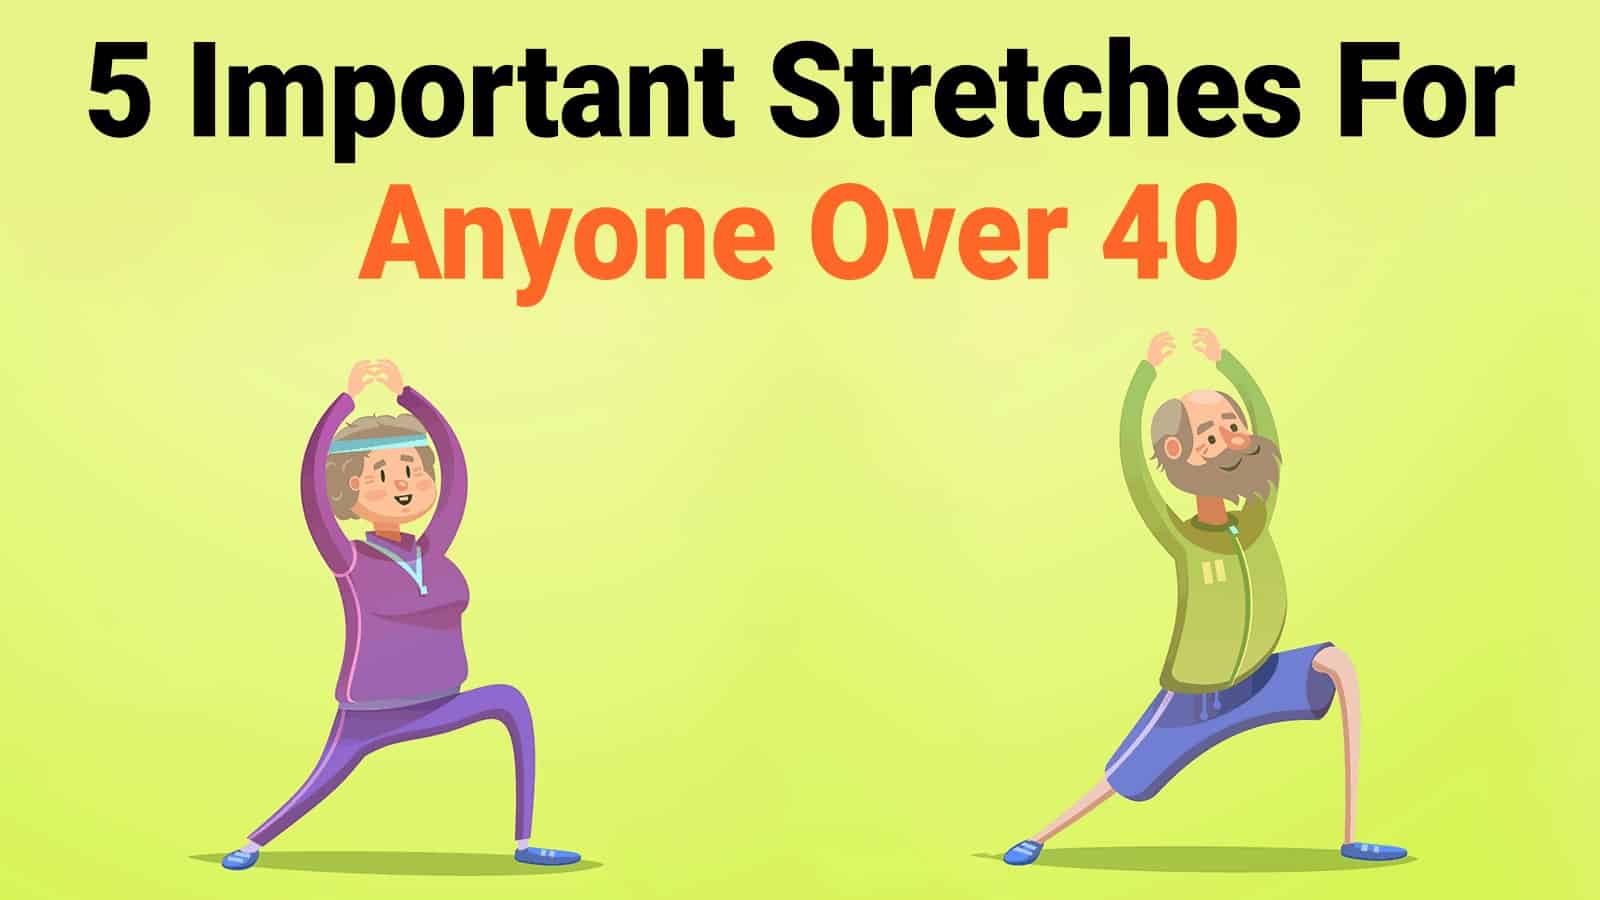 5 Important Stretches For Anyone Over 40